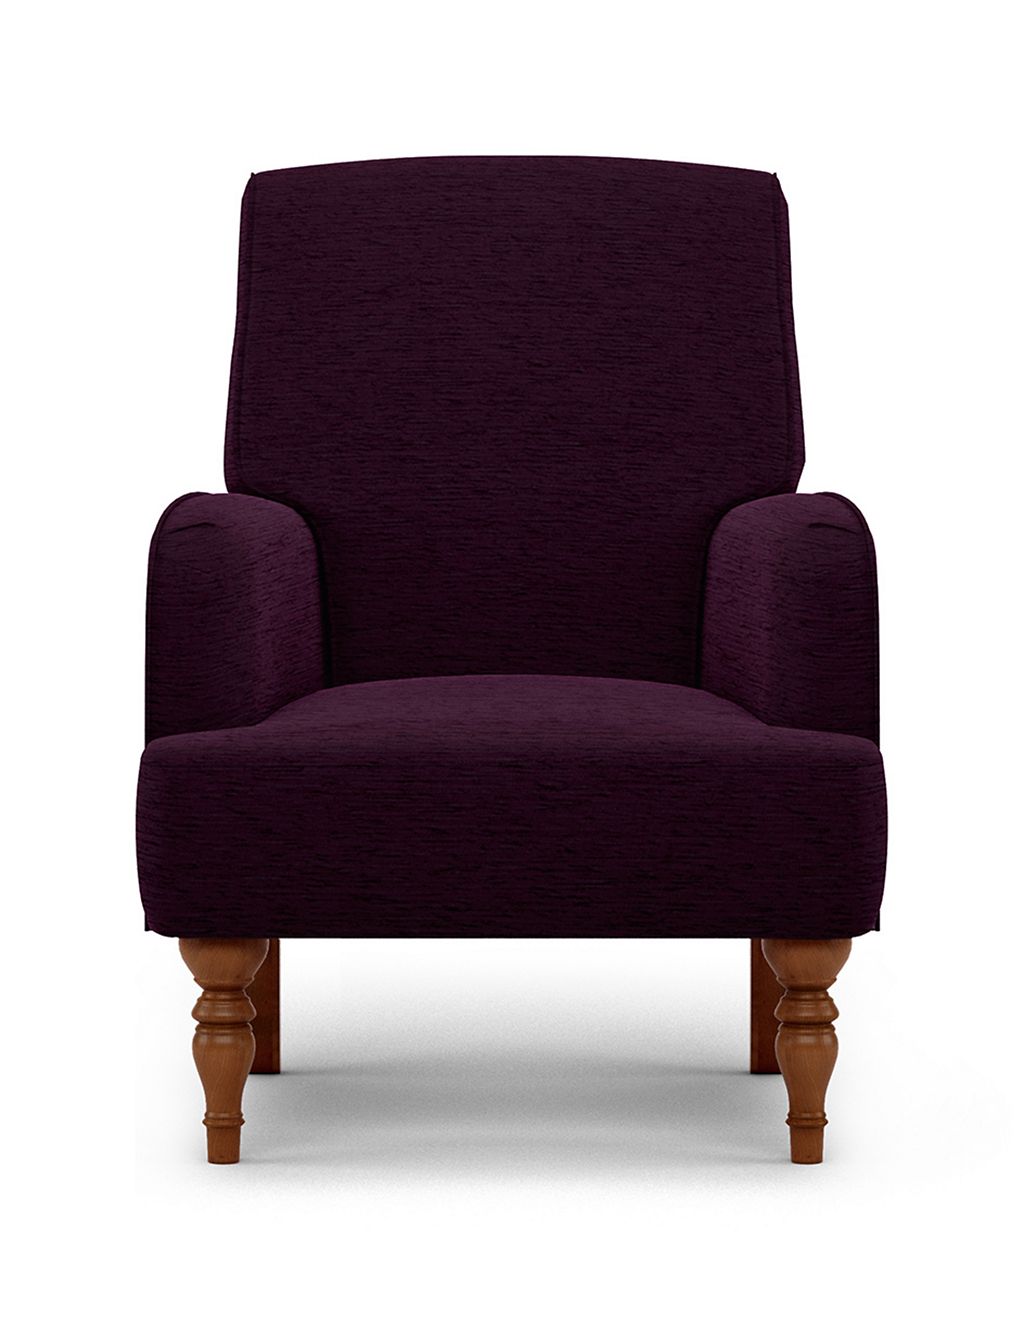 Denford Occasional Armchair Meredith Plum 1 of 1